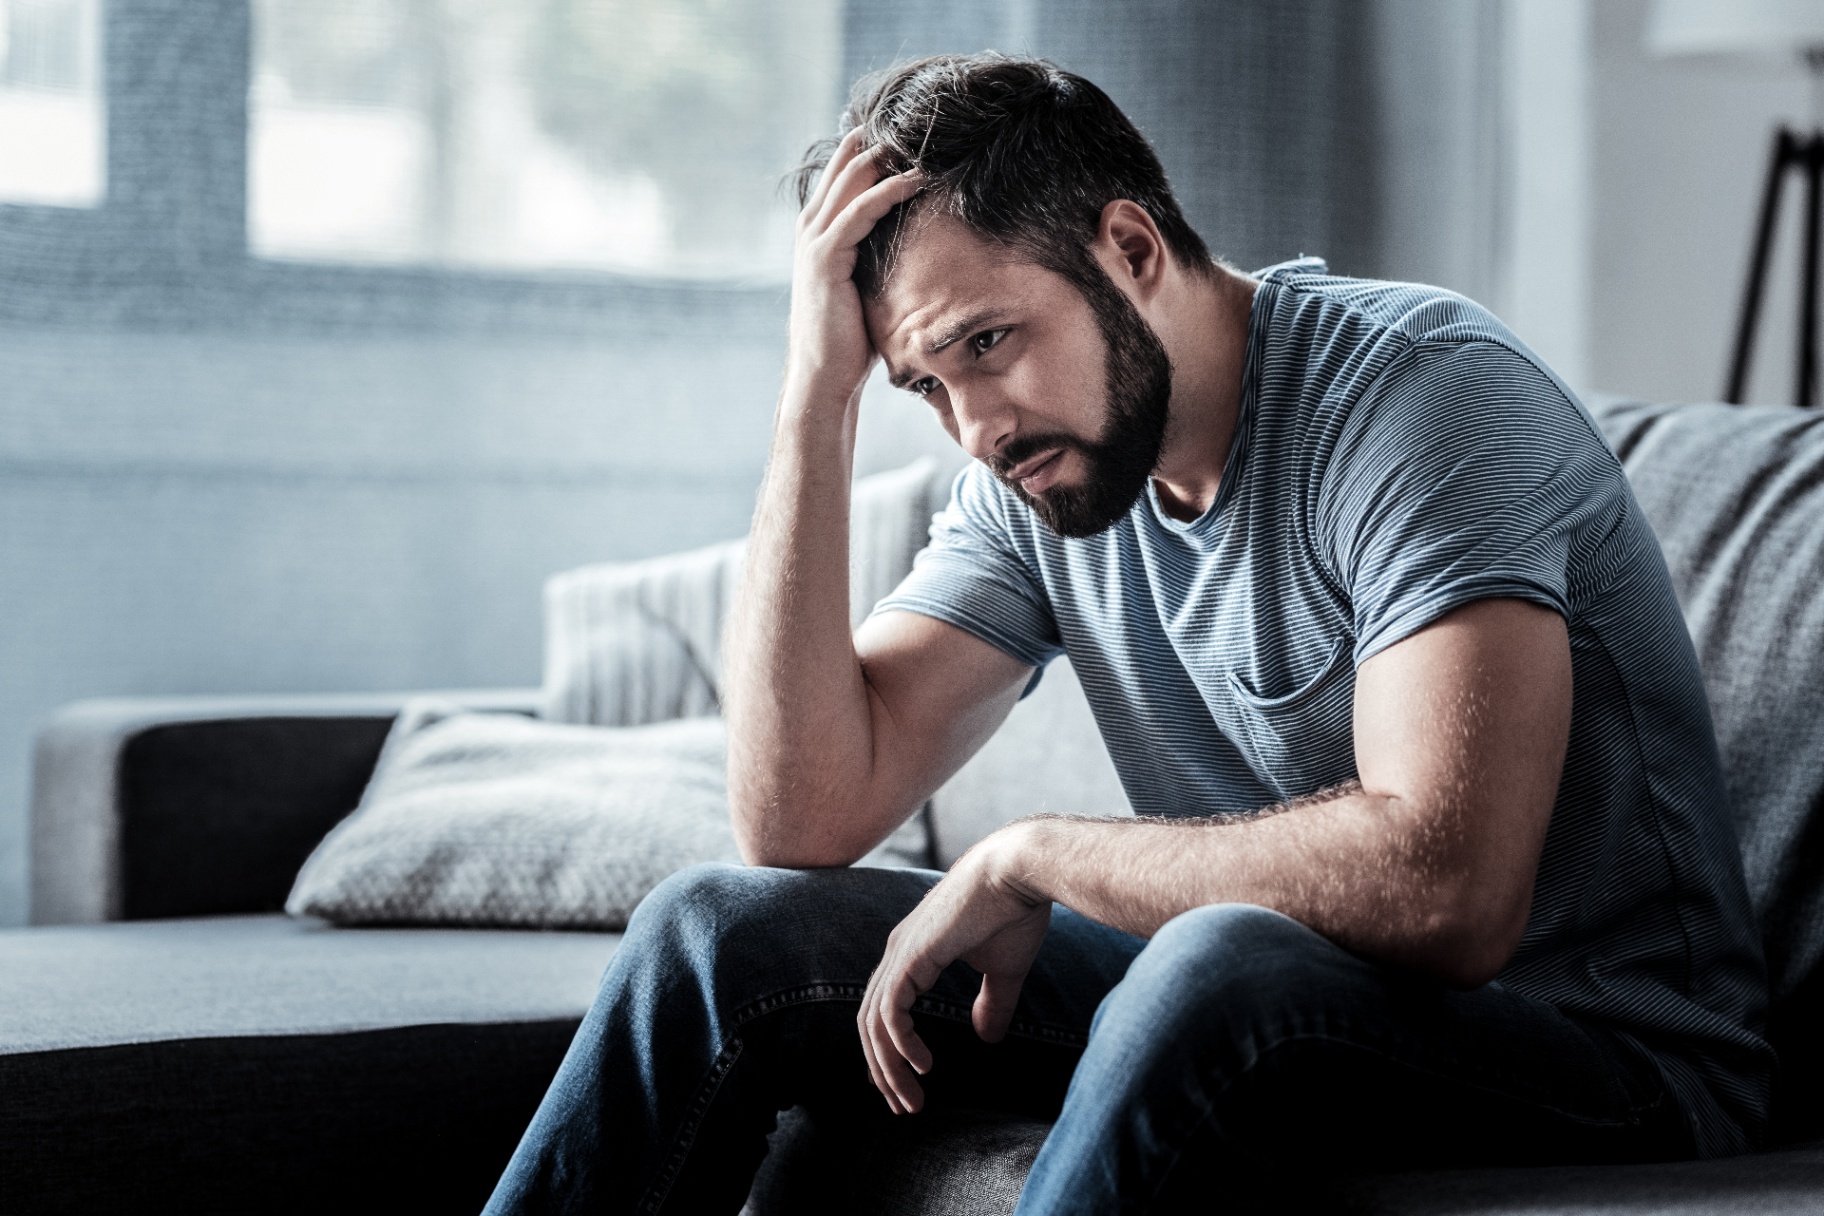 A man holds his head with a bleak expression while sitting on a sofa. Learn how eating disorder treatment in Delray Beach, FL can offer support with overcoming past trauma. Contact an EMDR therapist in Palm Beach, FL for support with trauma therapy in Delray Beach, FL. 